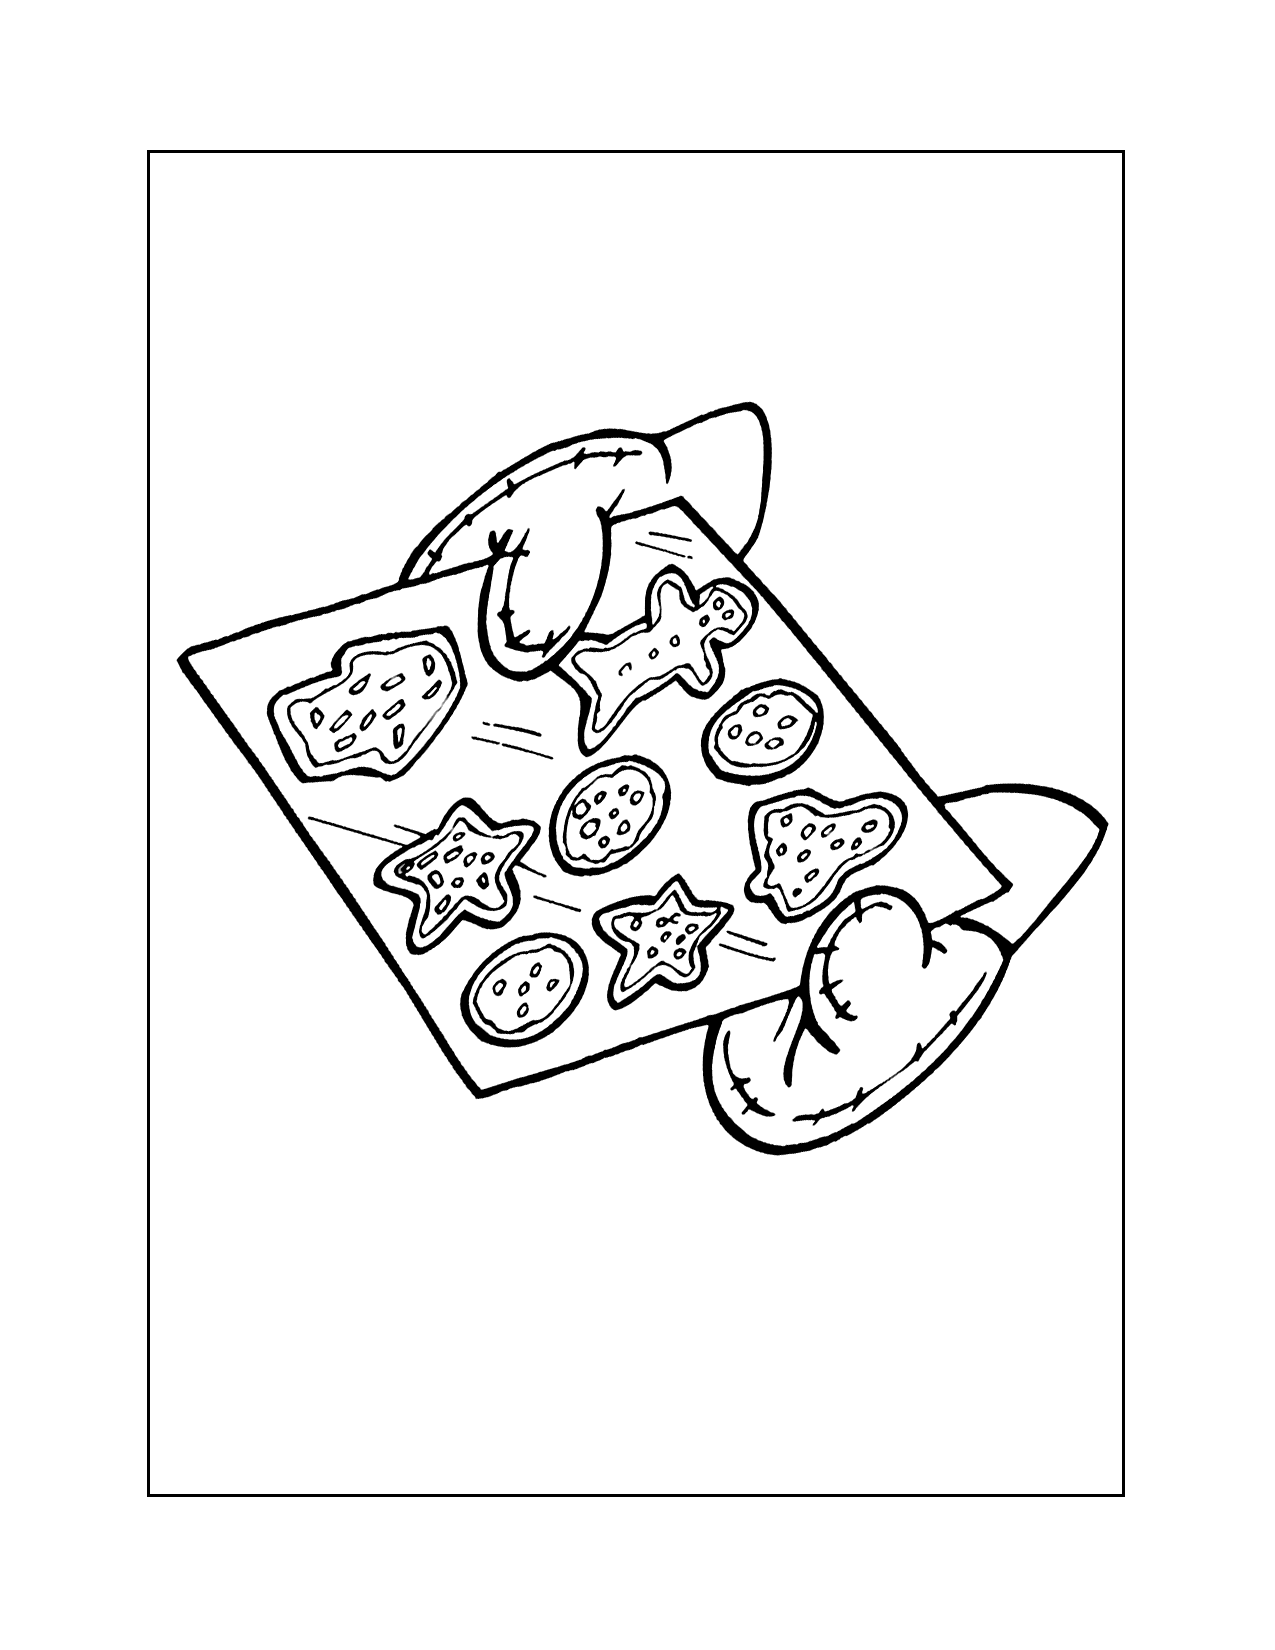 Baking Christmas Cookies Coloring Page